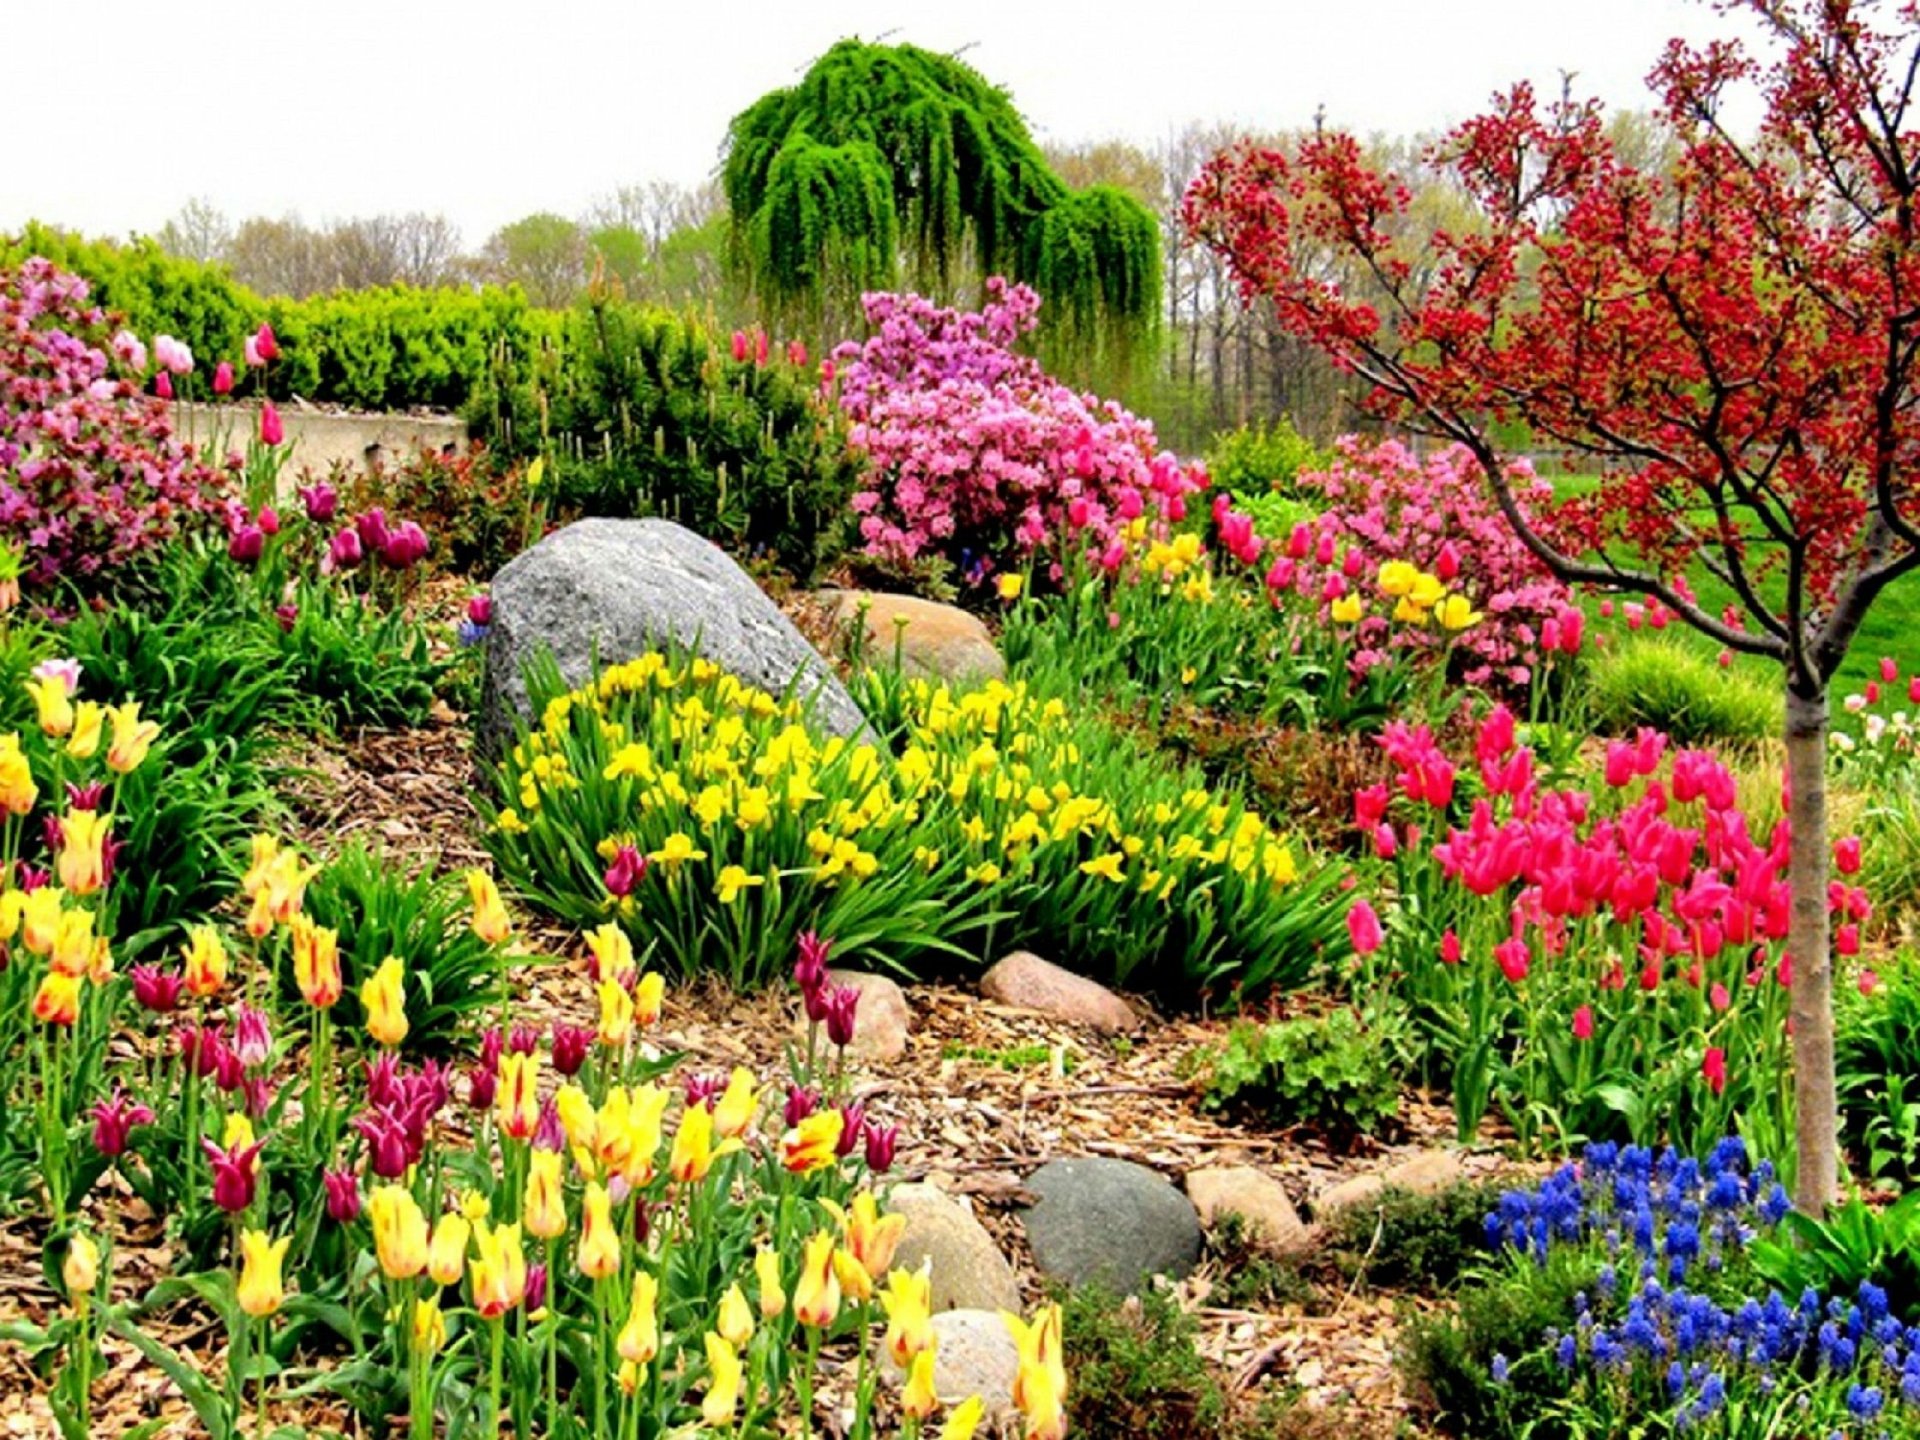 flower garden Image - ID: 10482 - Image Abyss